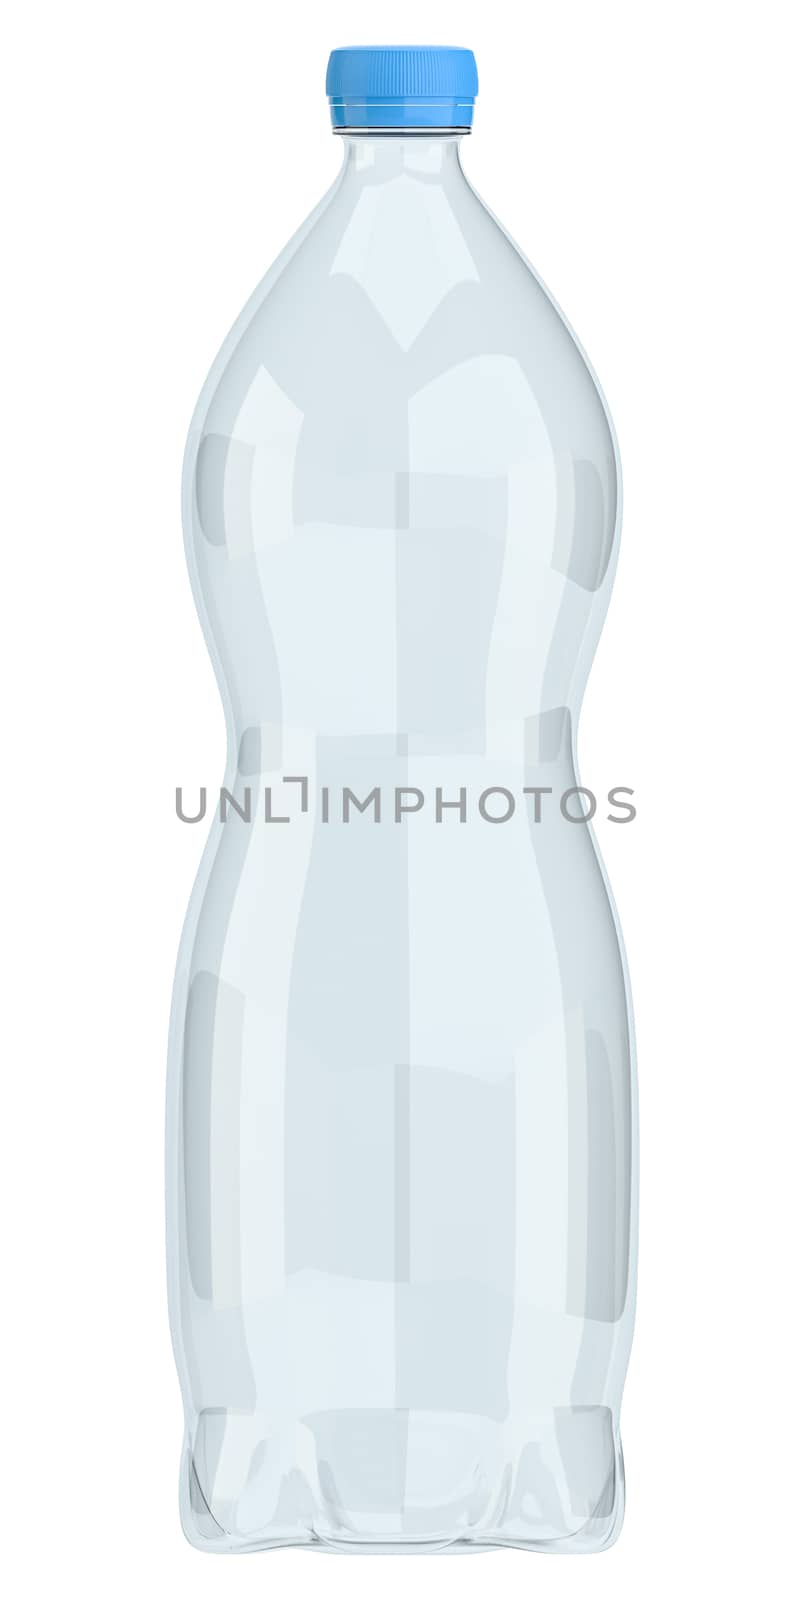 Plastic bottle of drinking water isolated on white background. 3d illustration